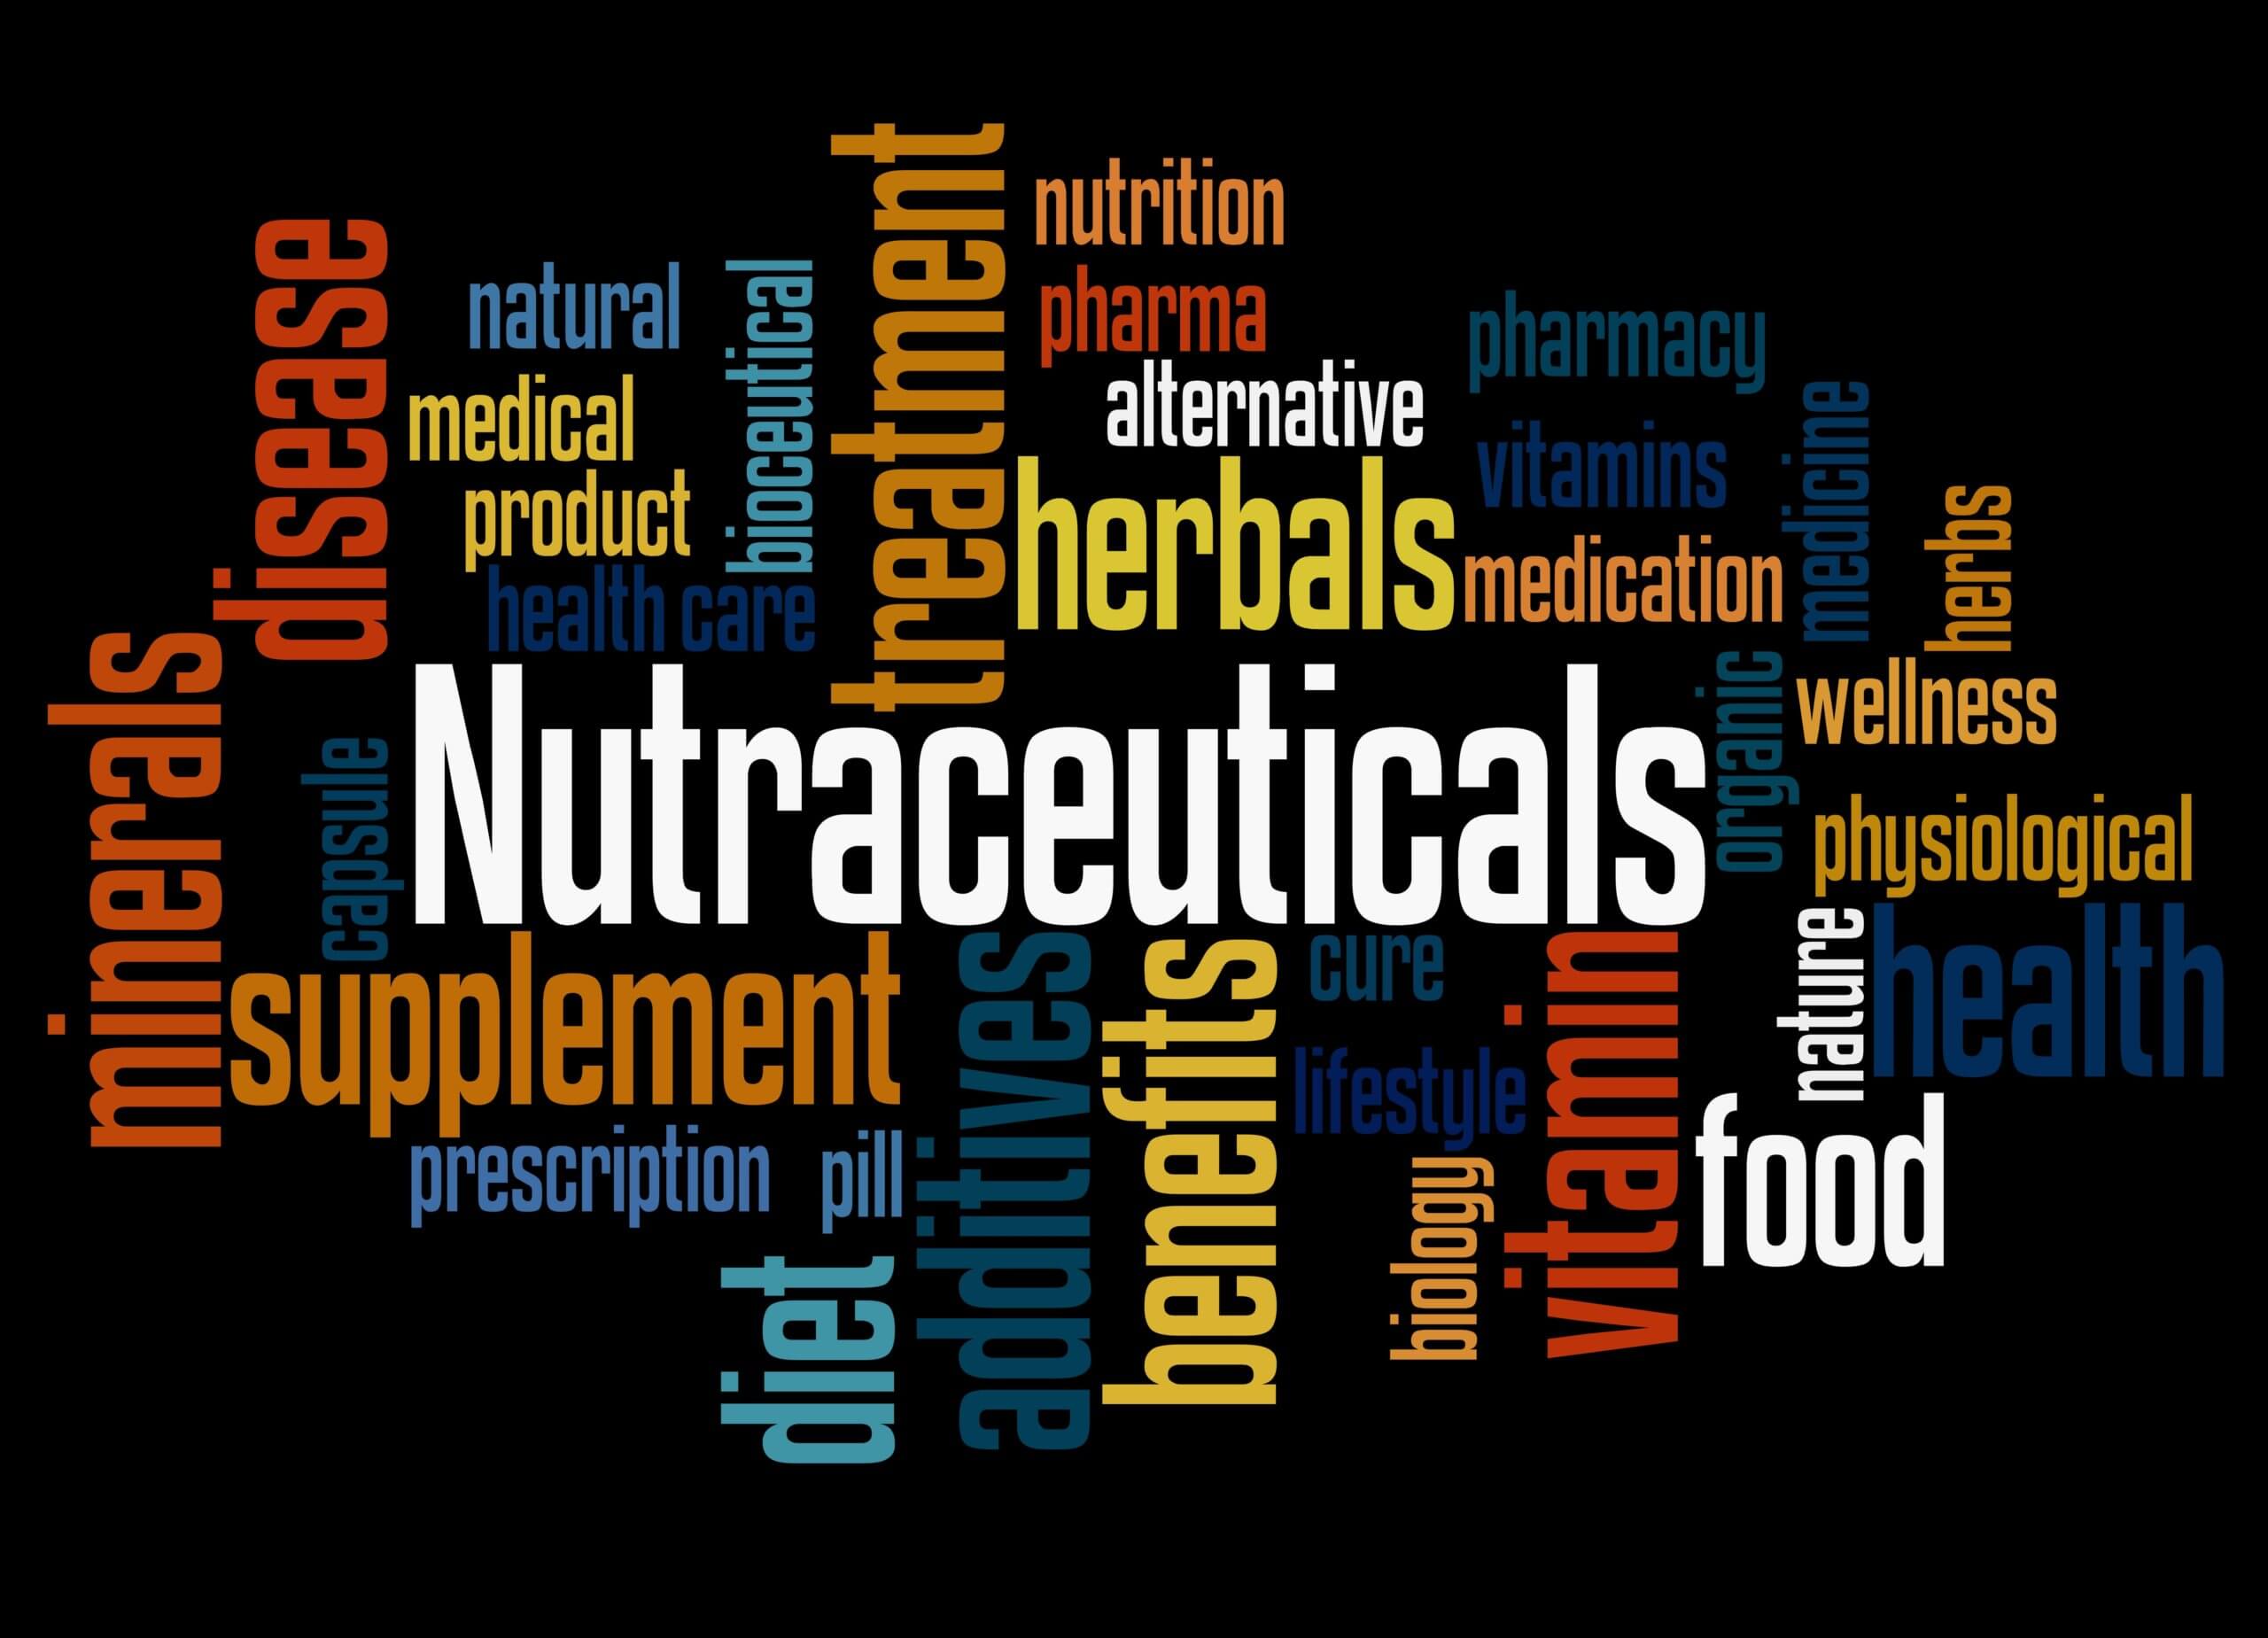 What are nutraceuticals and the general aspects of nutraceuticals